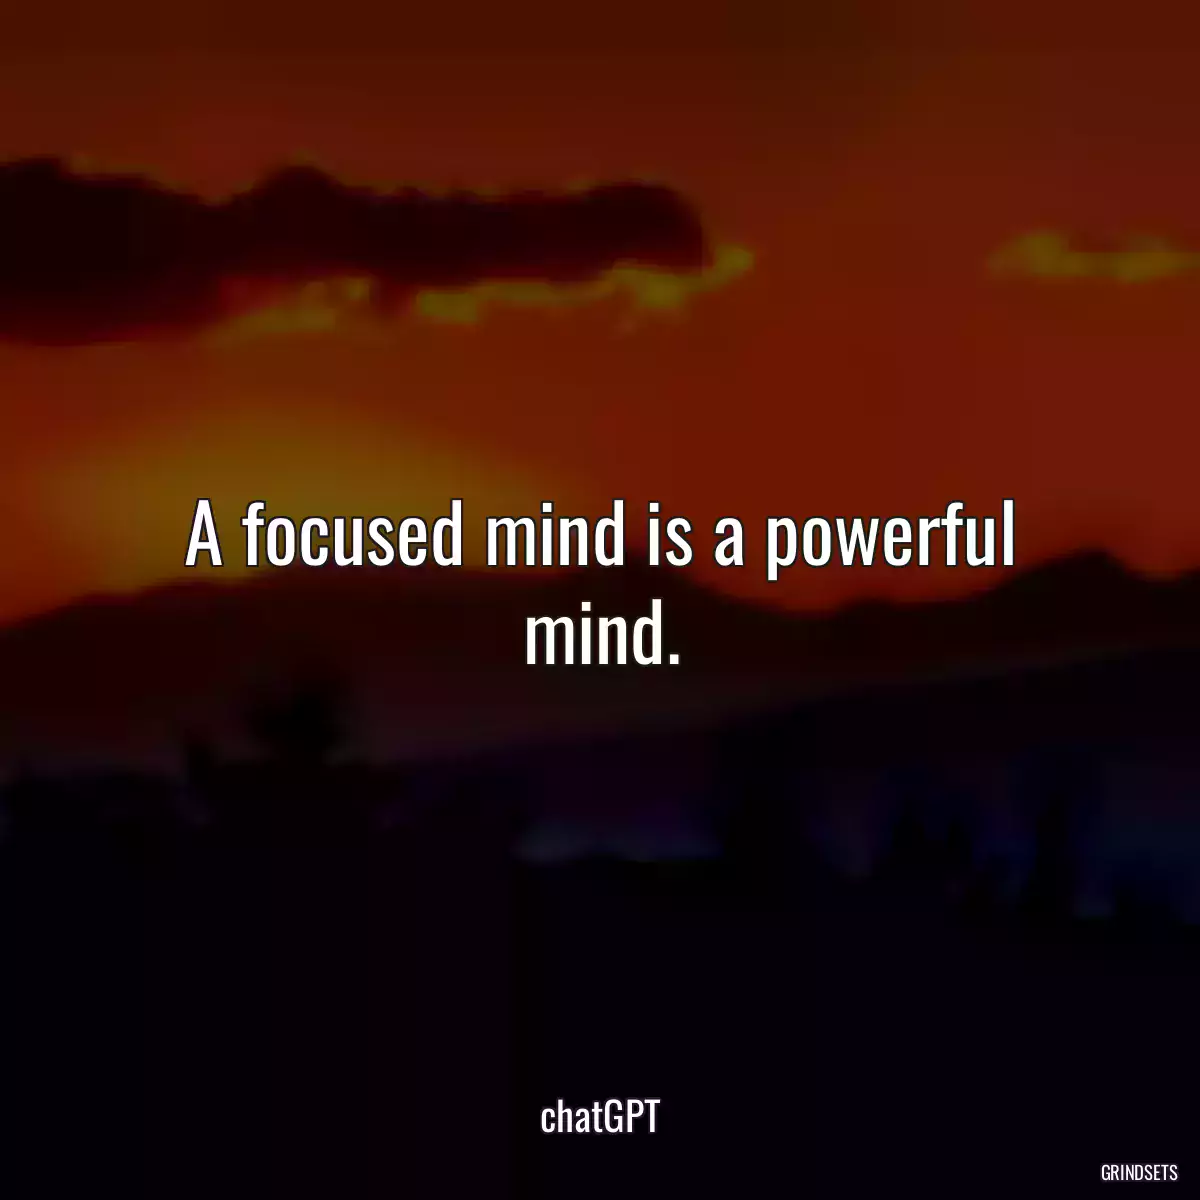 A focused mind is a powerful mind.